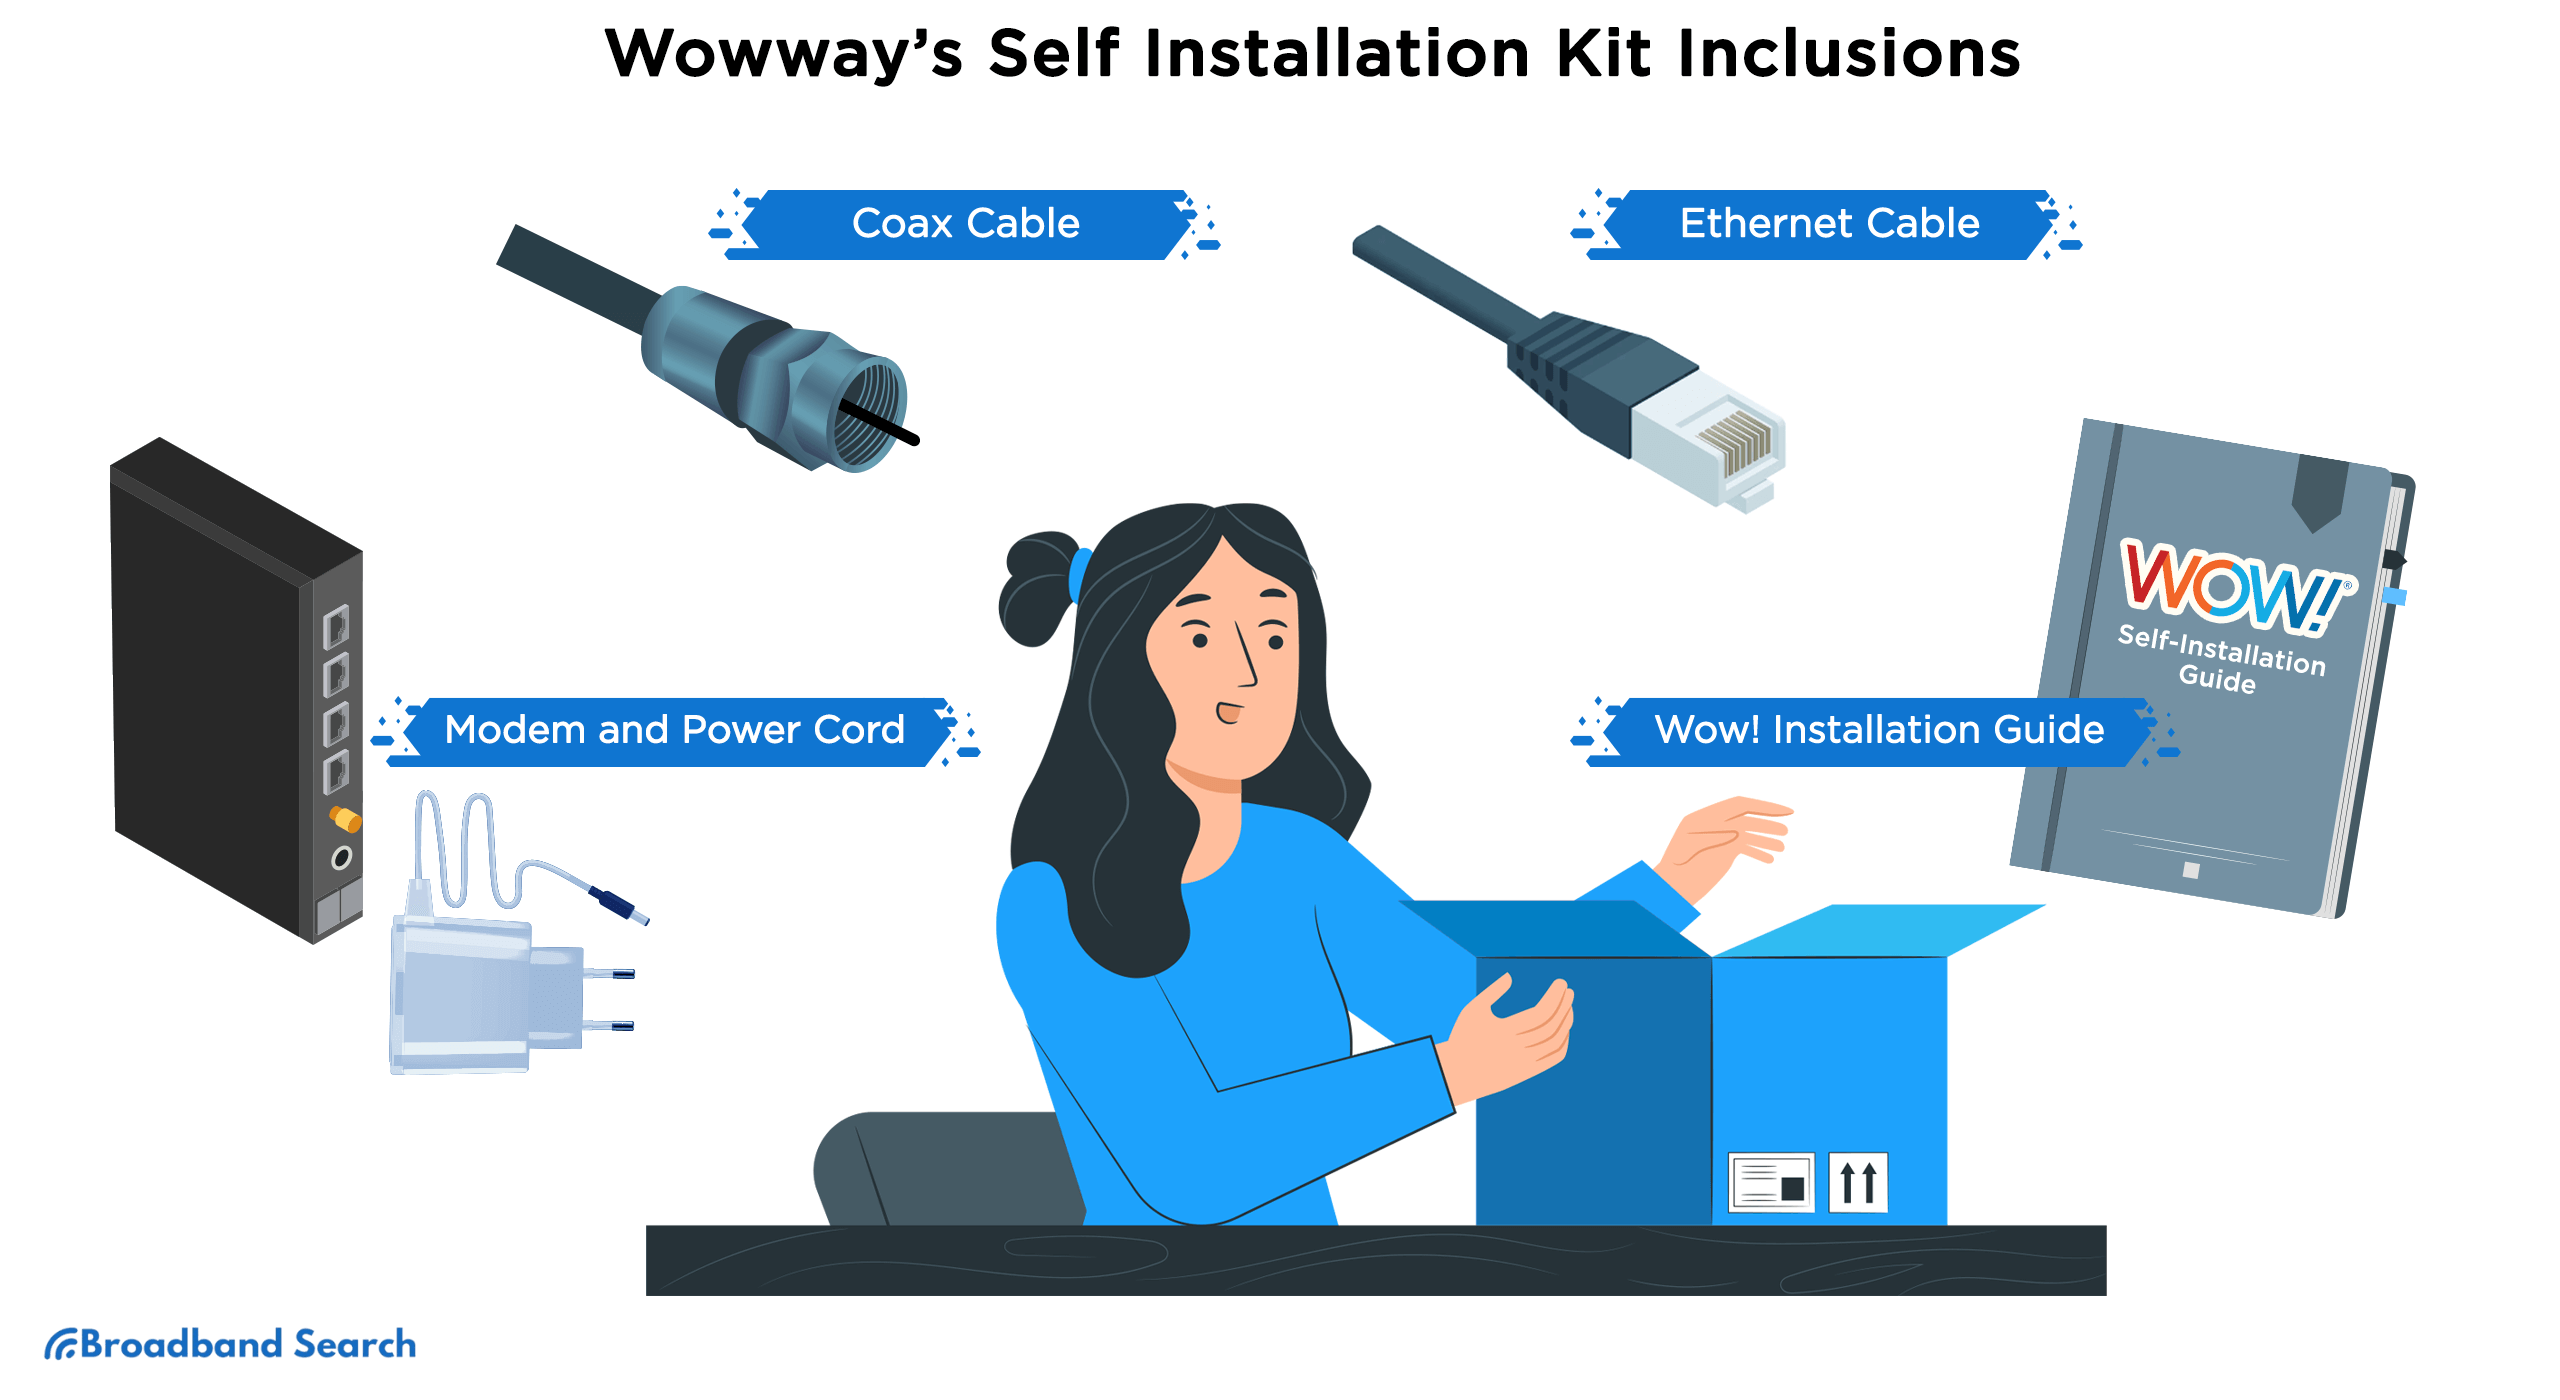 Wowway’s Self Installation Kit Inclusions